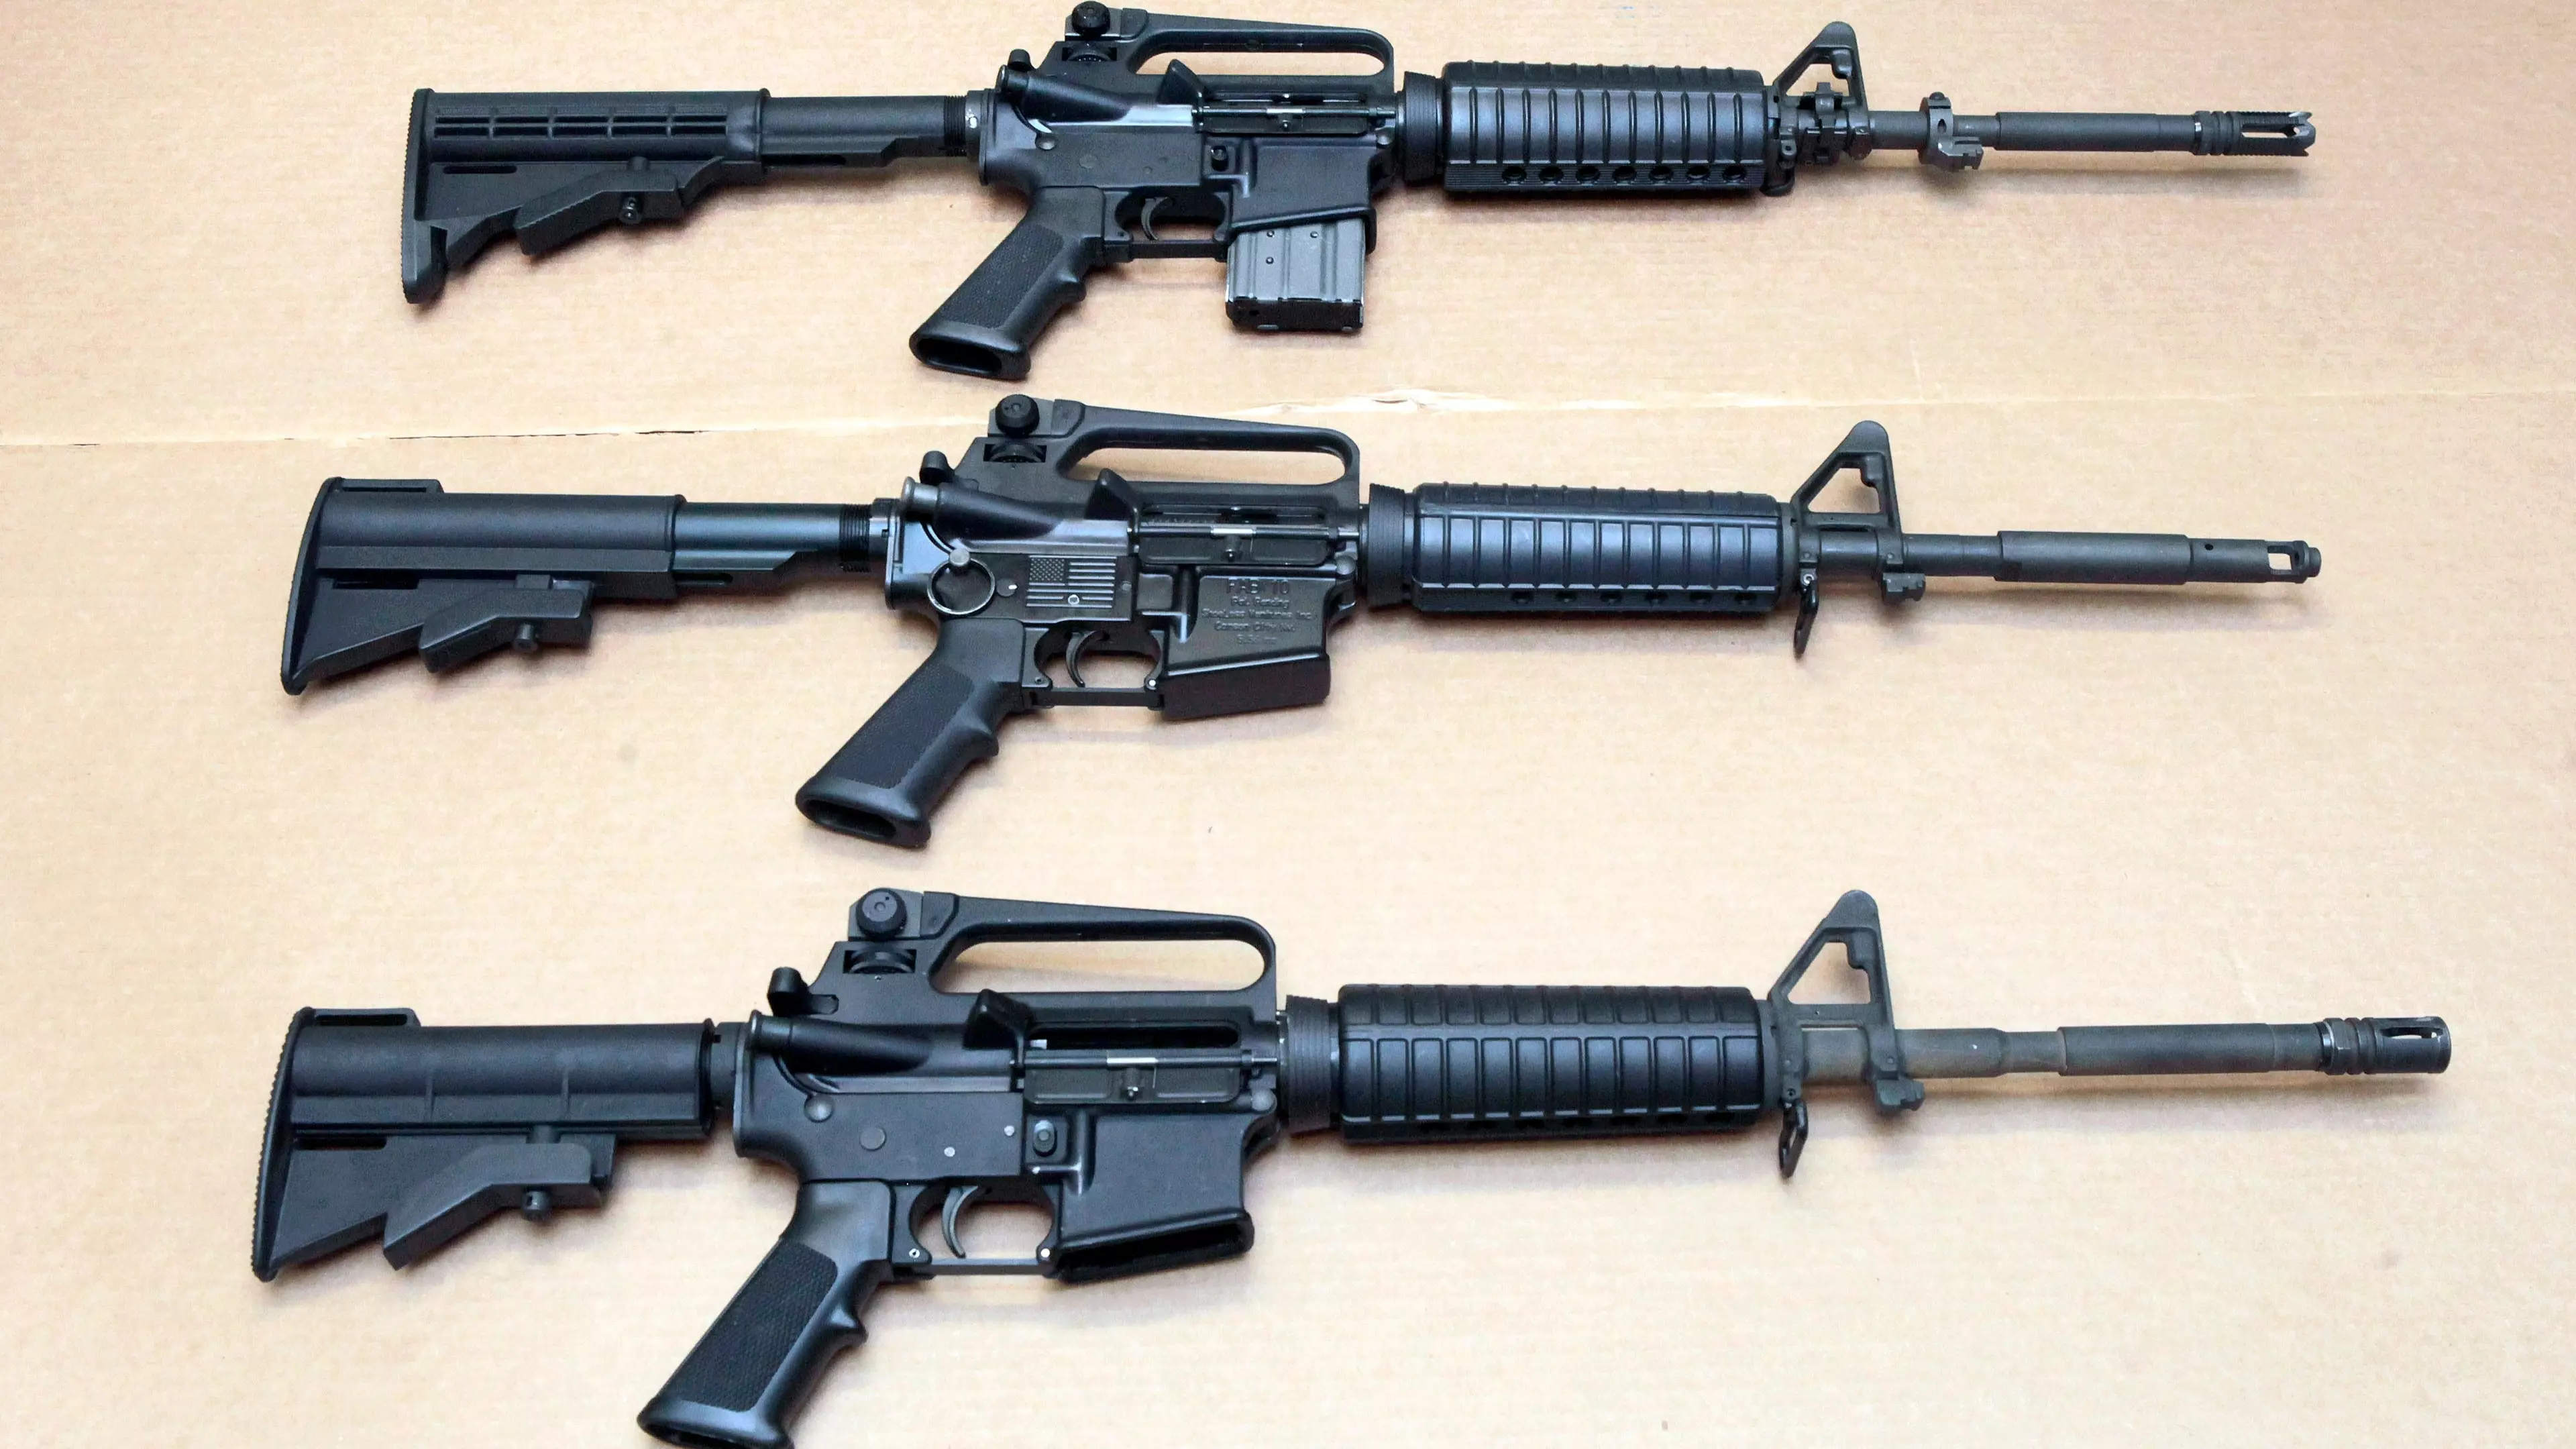 Teen Girl Complains To New Zealand Prime Minister For Taking Away Her AR-15 Rifle